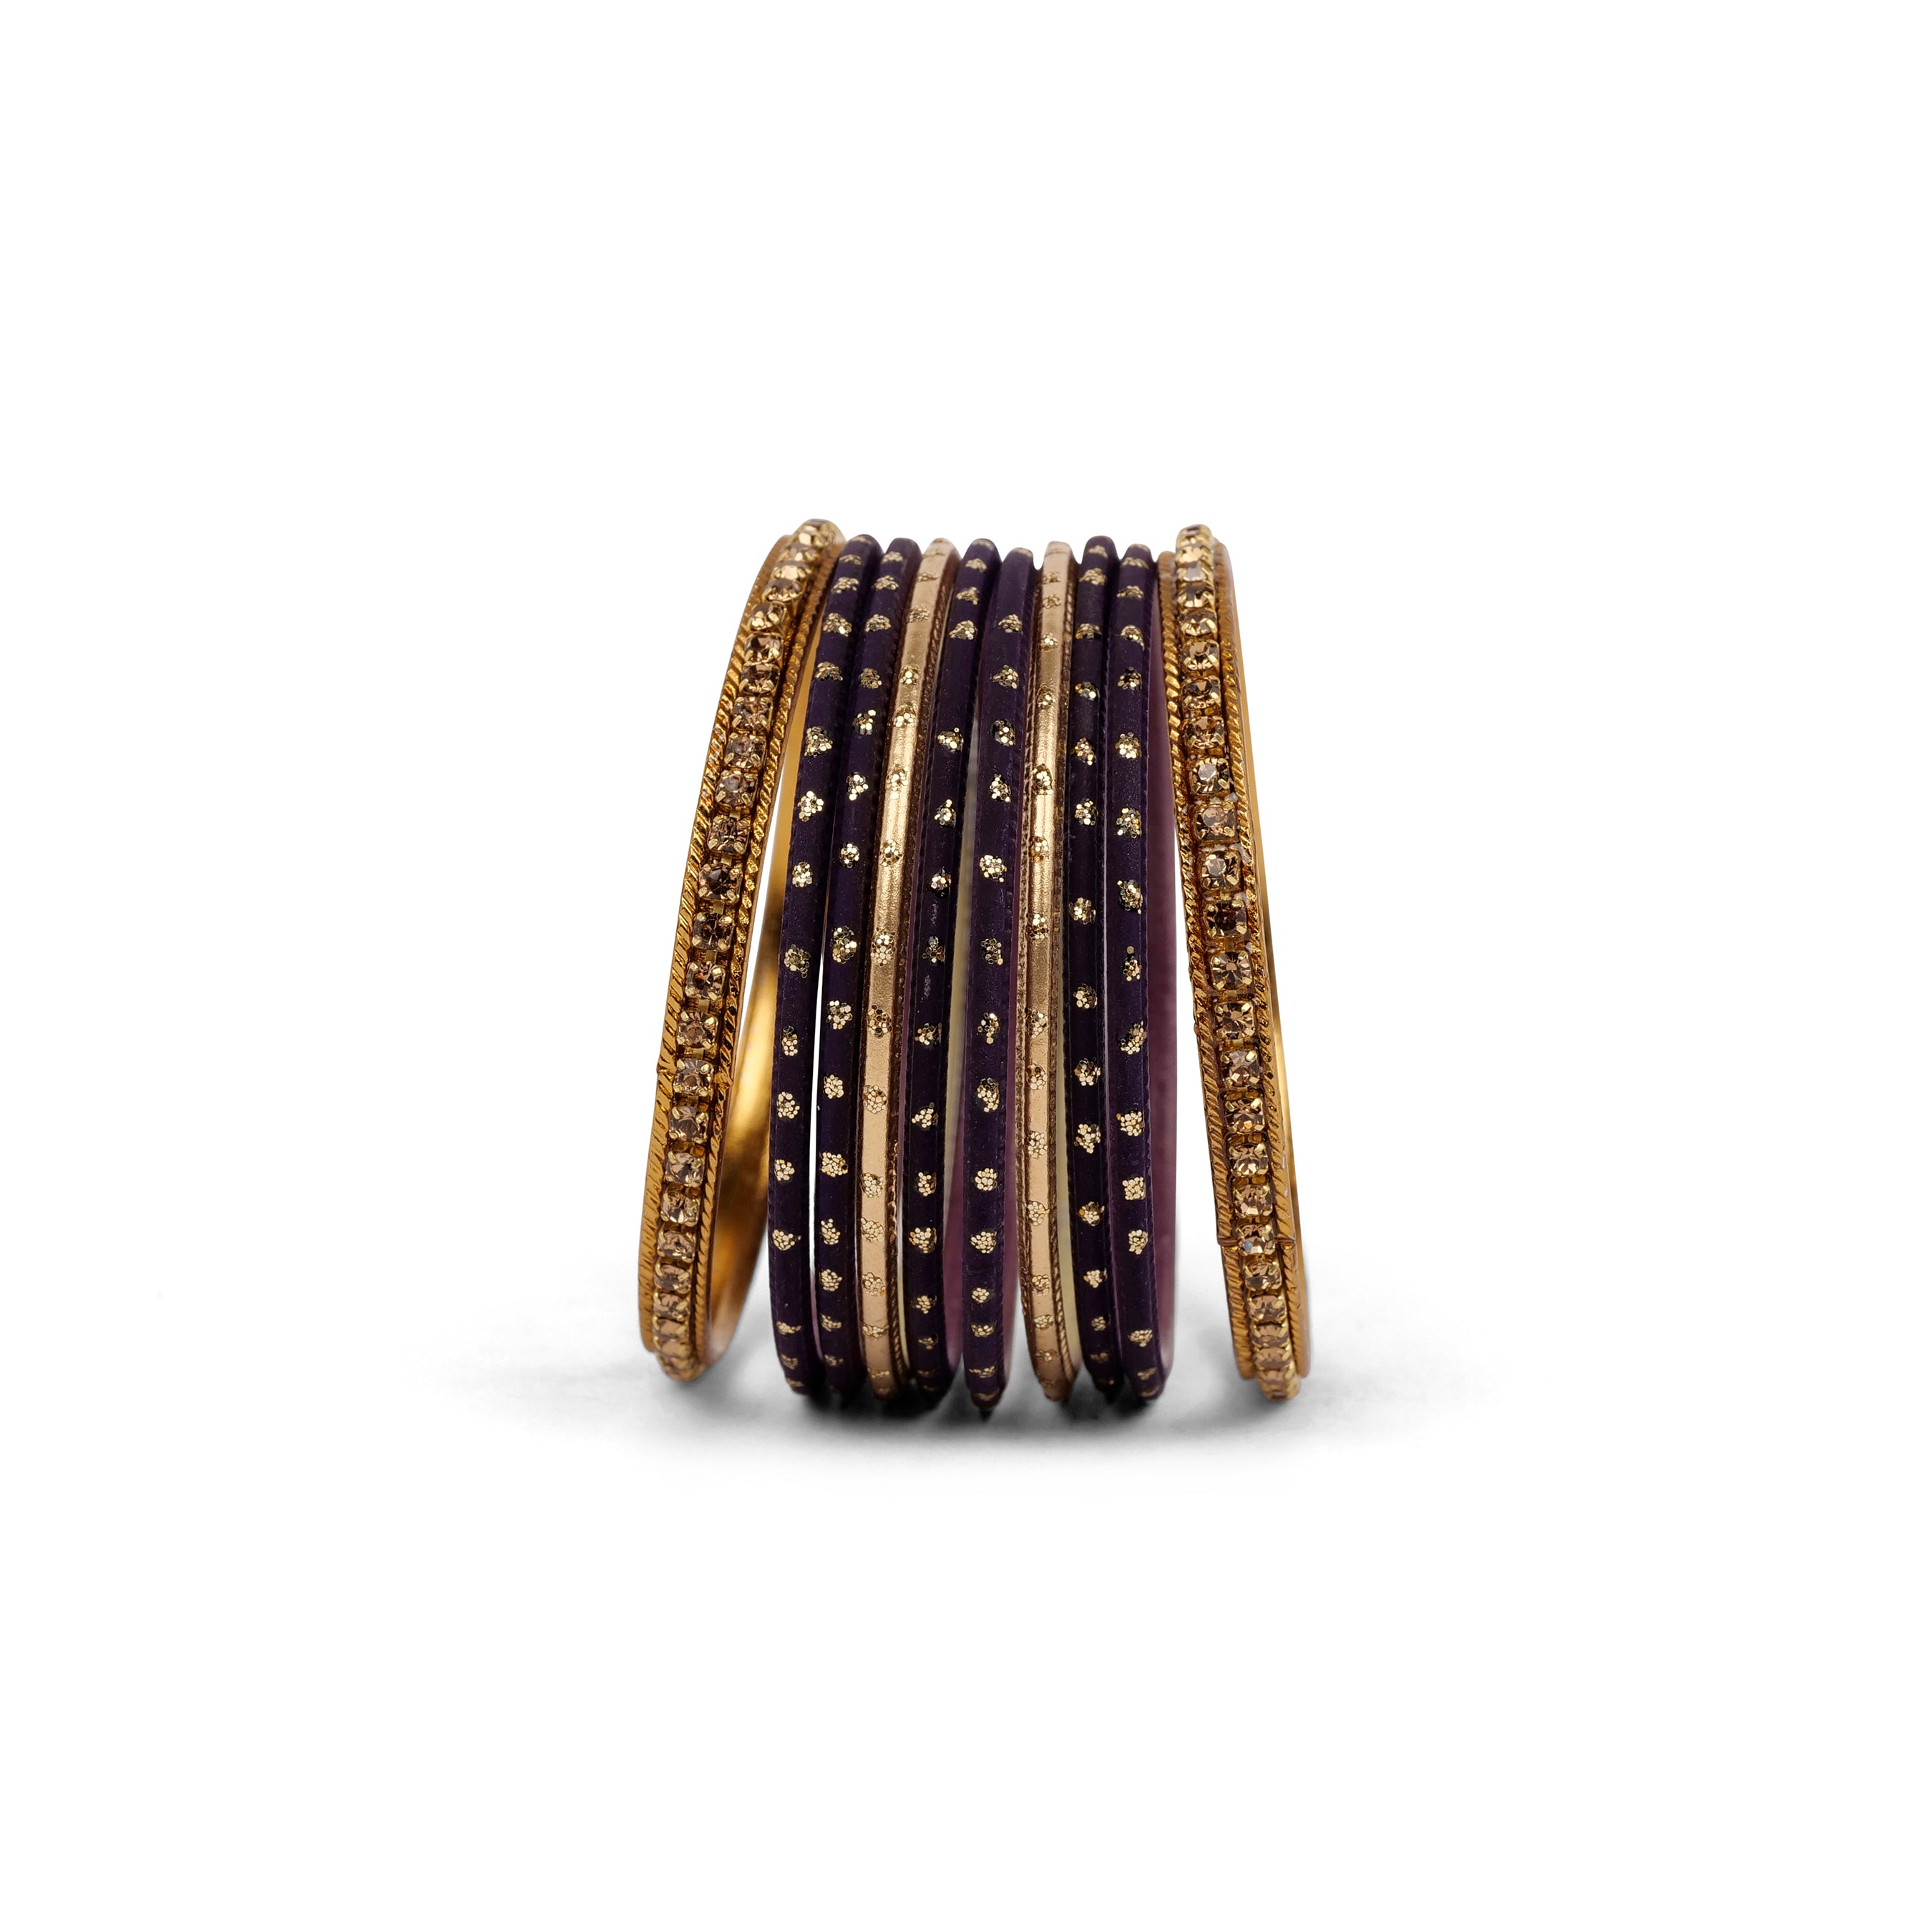 Children's Bangle Set in Deep Purple and Antique Gold